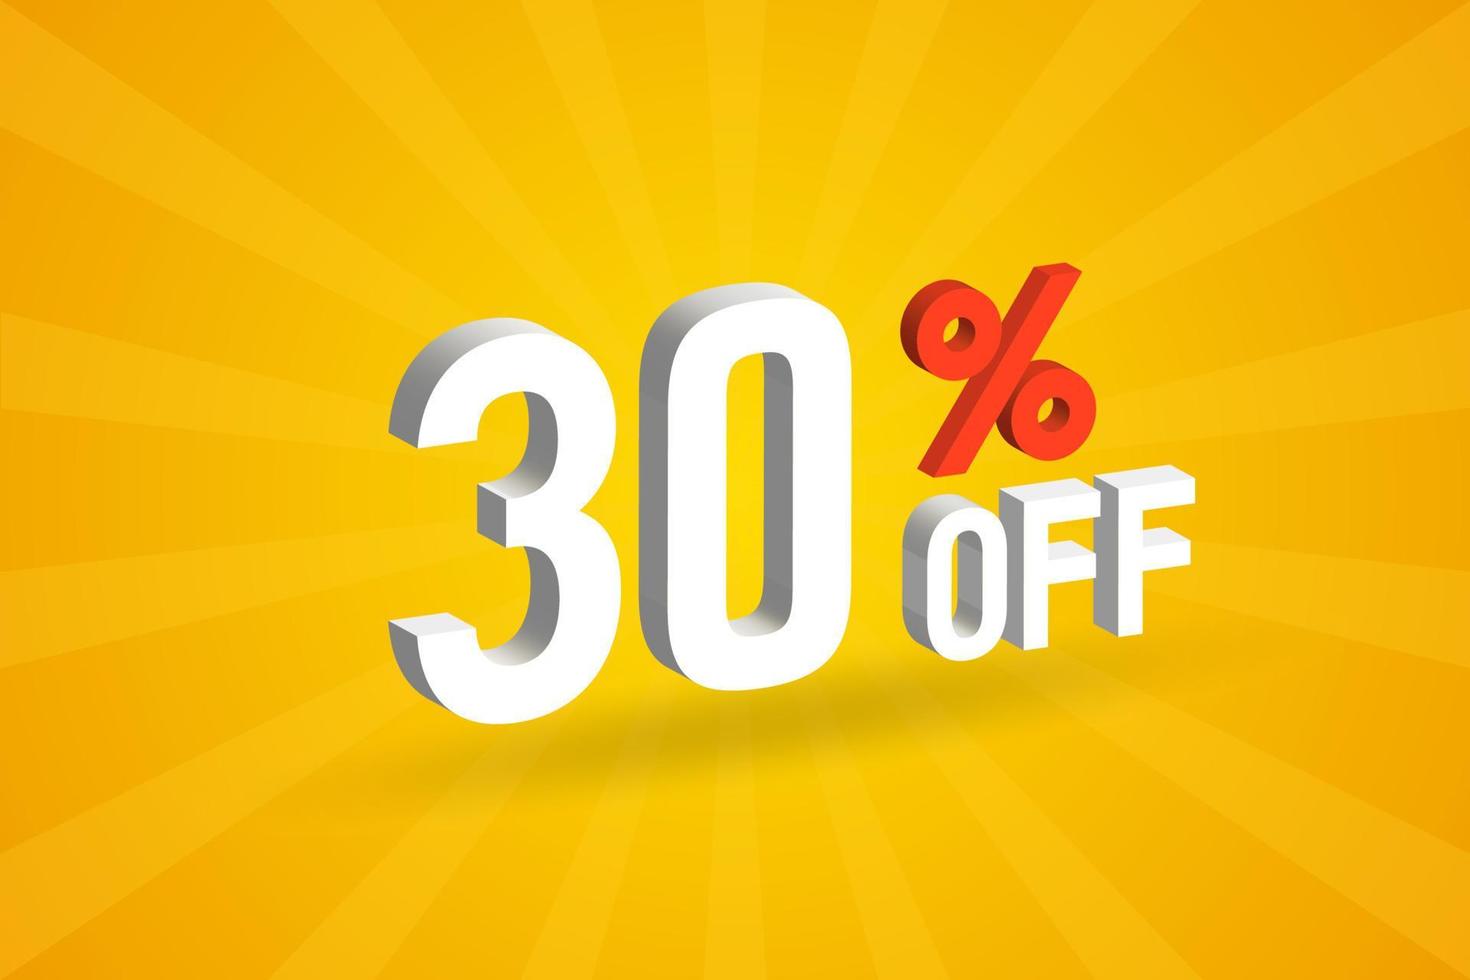 30 Percent off 3D Special promotional campaign design. 30 off 3D Discount Offer for Sale and marketing. vector